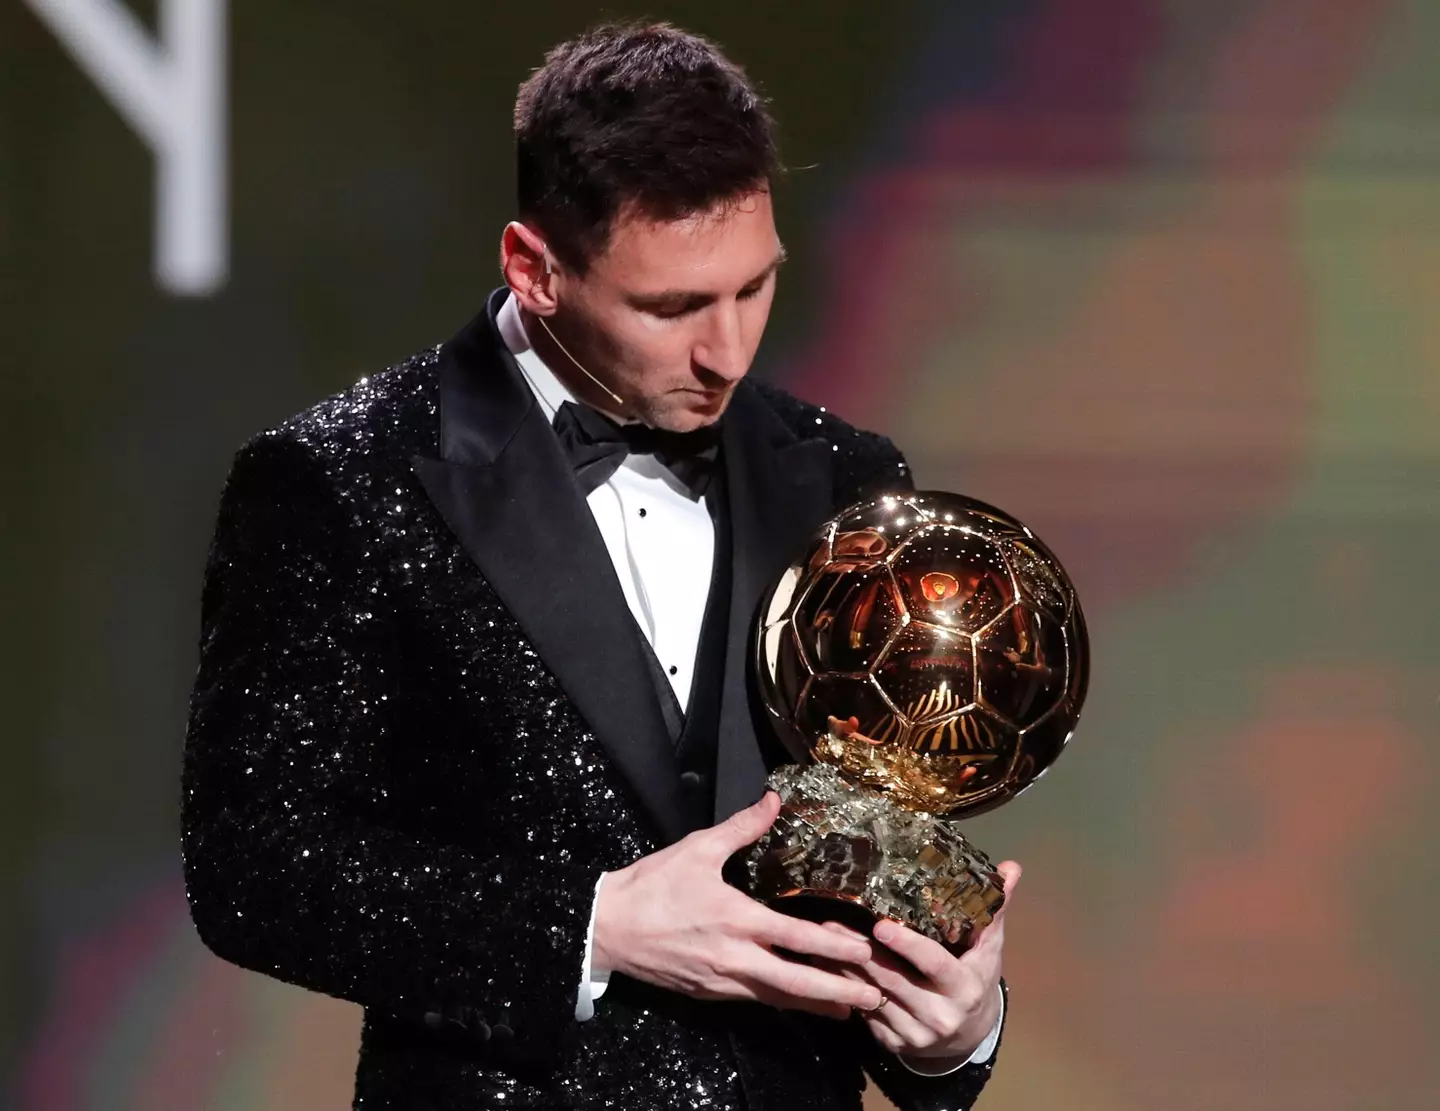 Messi has won the award seven times now. Image: PA Images